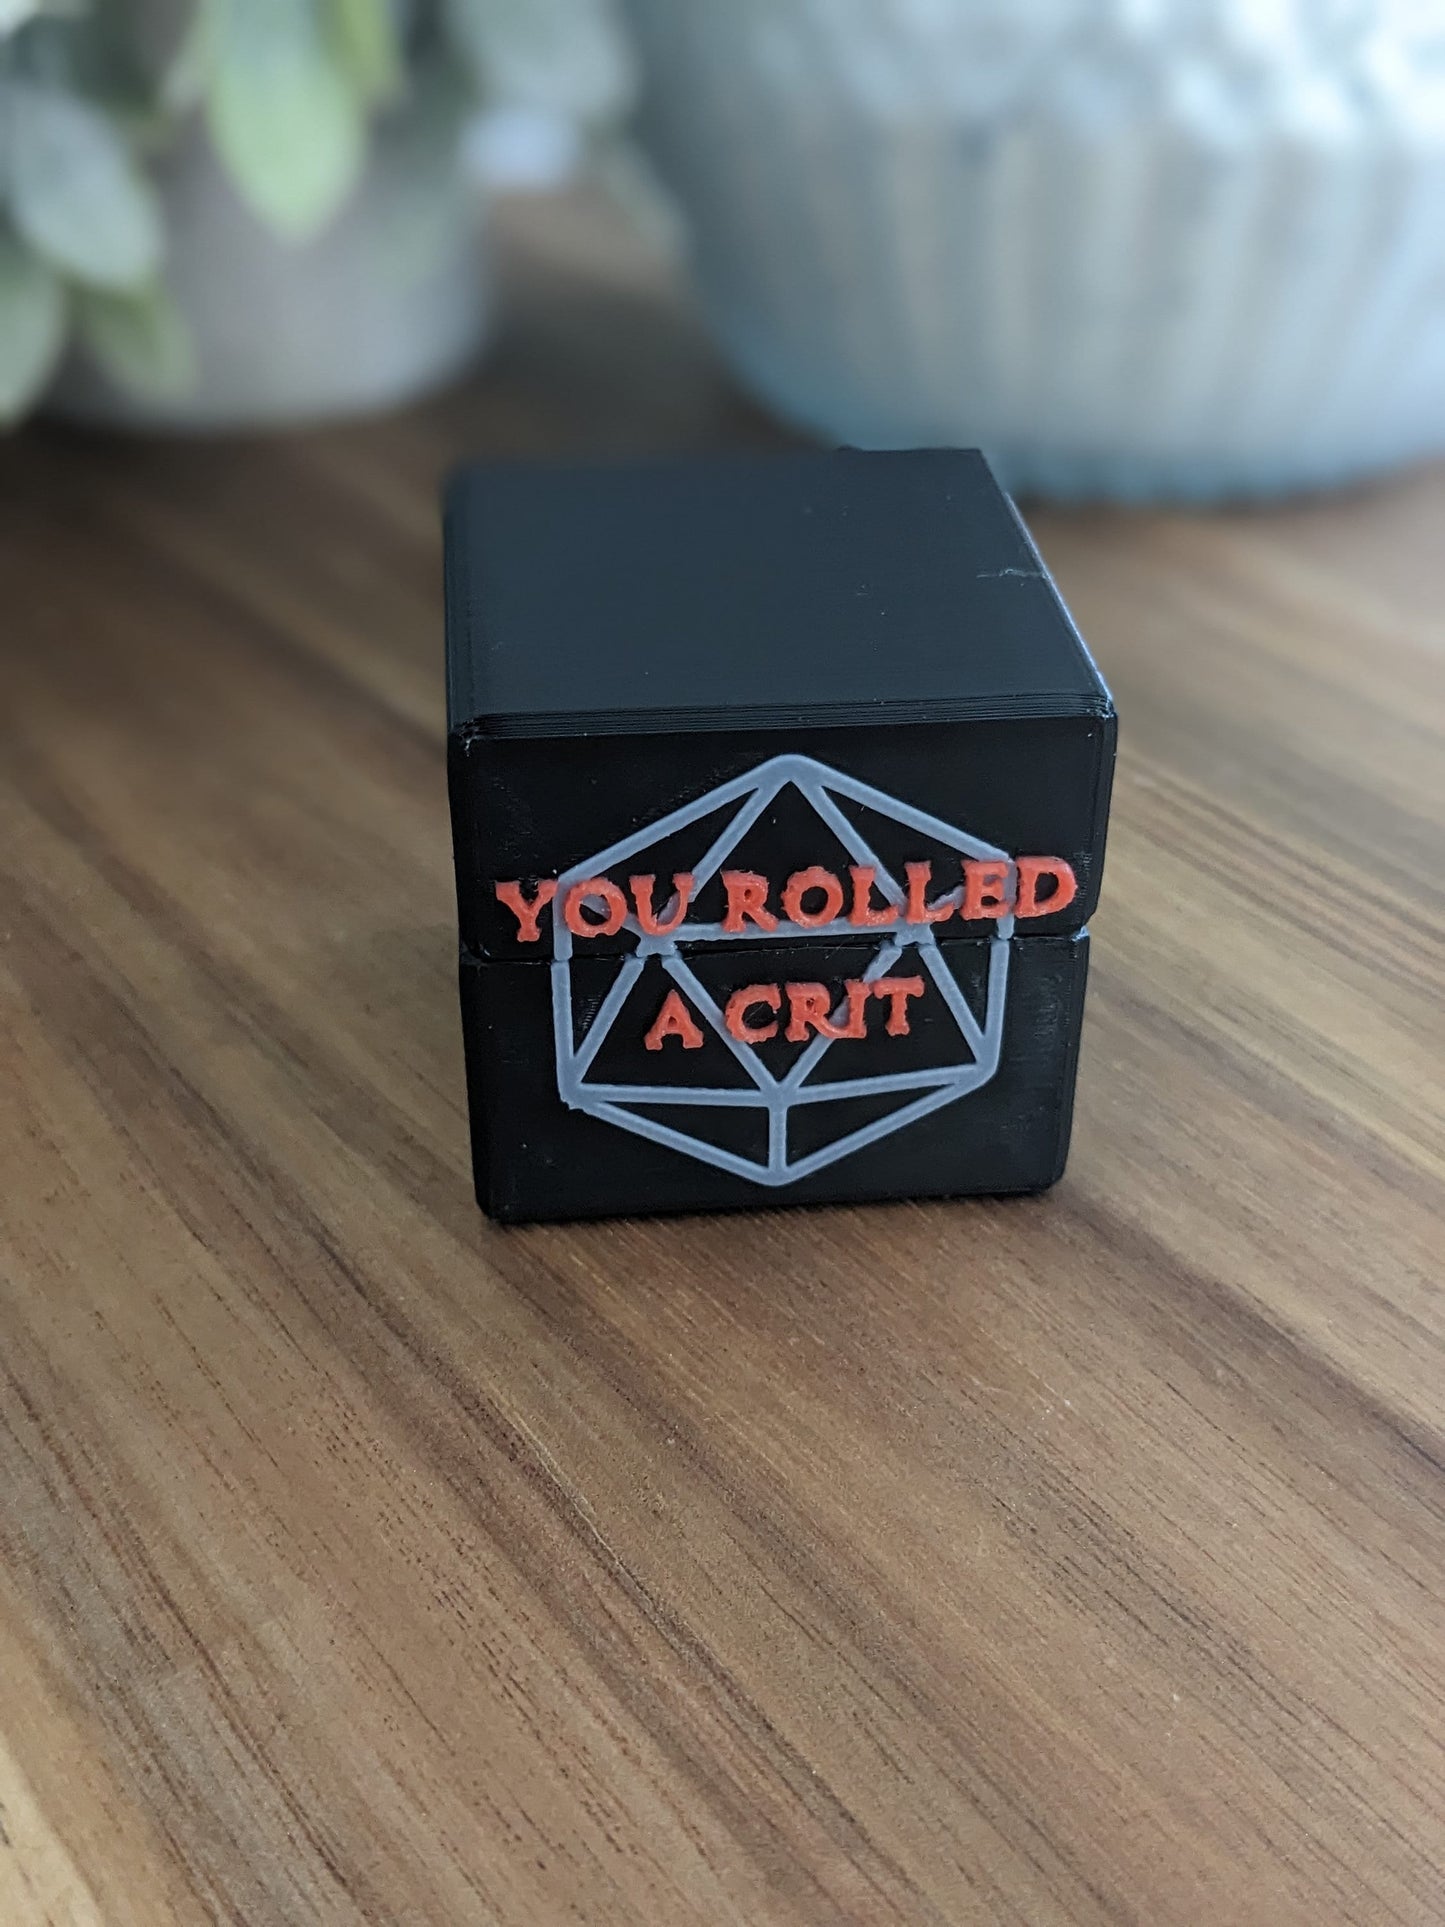 D20 You Rolled a Crit Ring Box (Proposal, Gift, Ring Bearer, ect) 20 sided dice